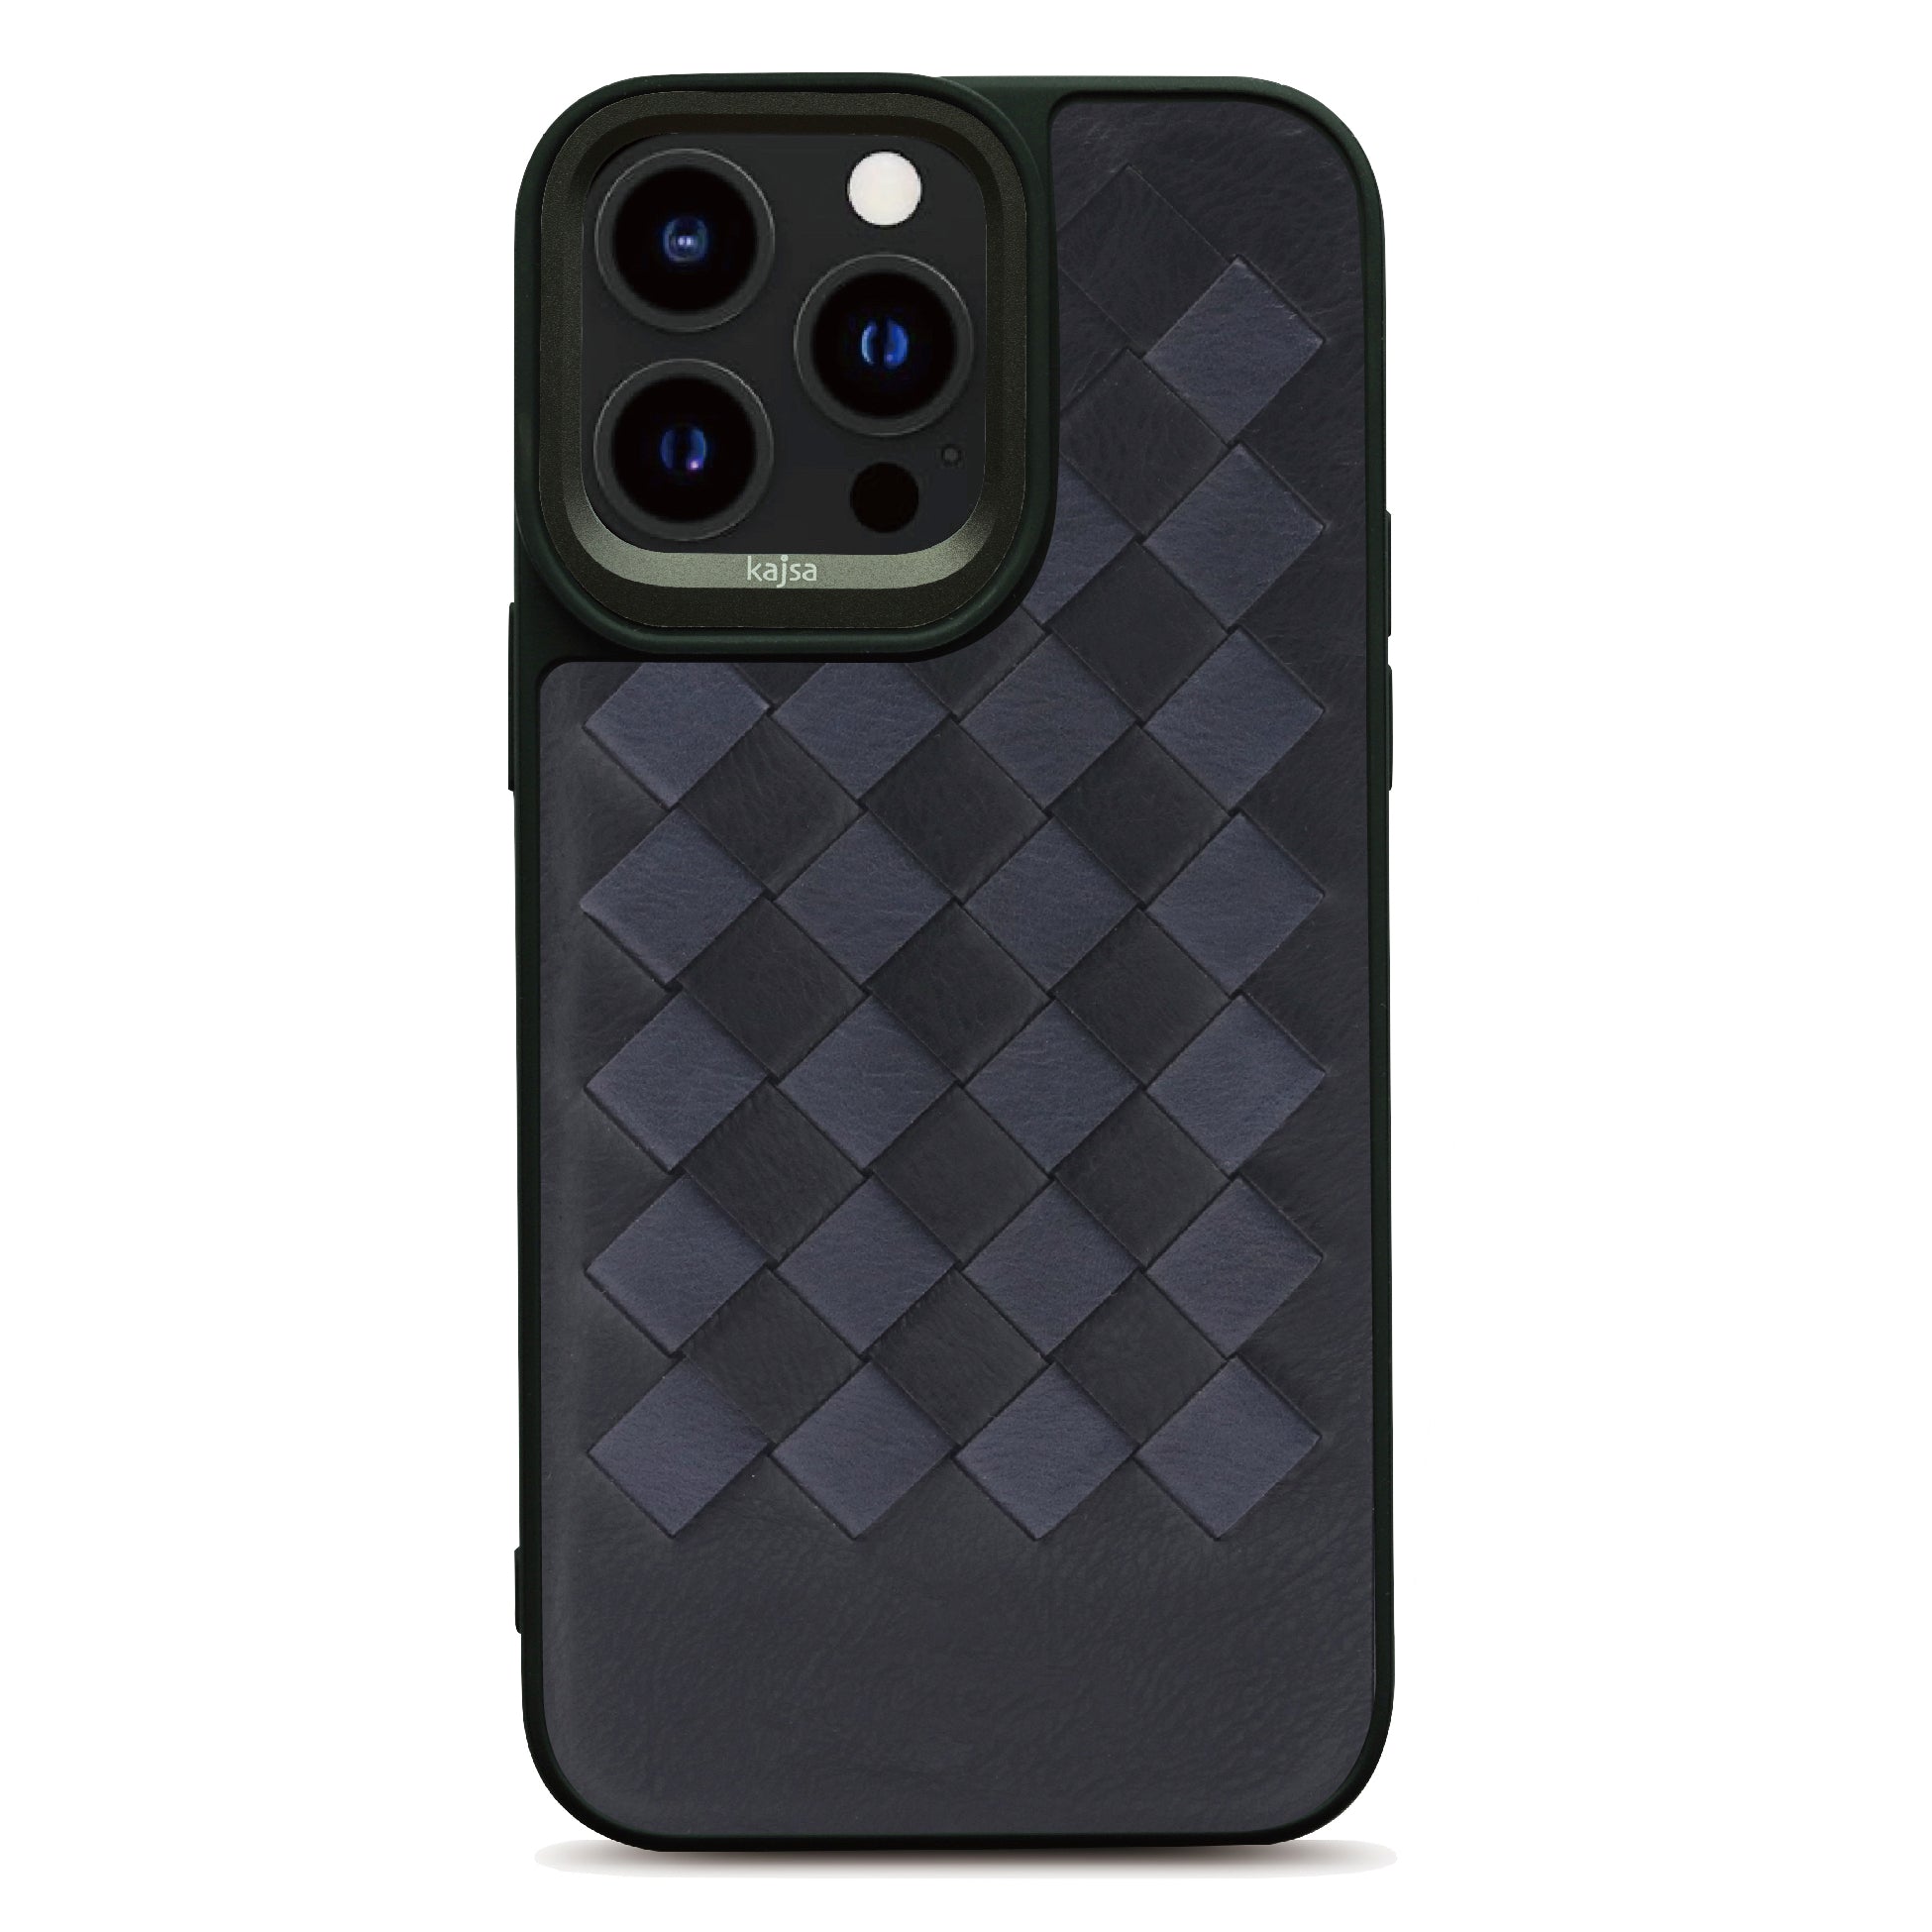 Preppie Collection - Dice Woven Back Case for iPhone 14-Phone Case- phone case - phone cases- phone cover- iphone cover- iphone case- iphone cases- leather case- leather cases- DIYCASE - custom case - leather cover - hand strap case - croco pattern case - snake pattern case - carbon fiber phone case - phone case brand - unique phone case - high quality - phone case brand - protective case - buy phone case hong kong - online buy phone case - iphone‎手機殼 - 客製化手機殼 - samsung ‎手機殼 - 香港手機殼 - 買電話殼